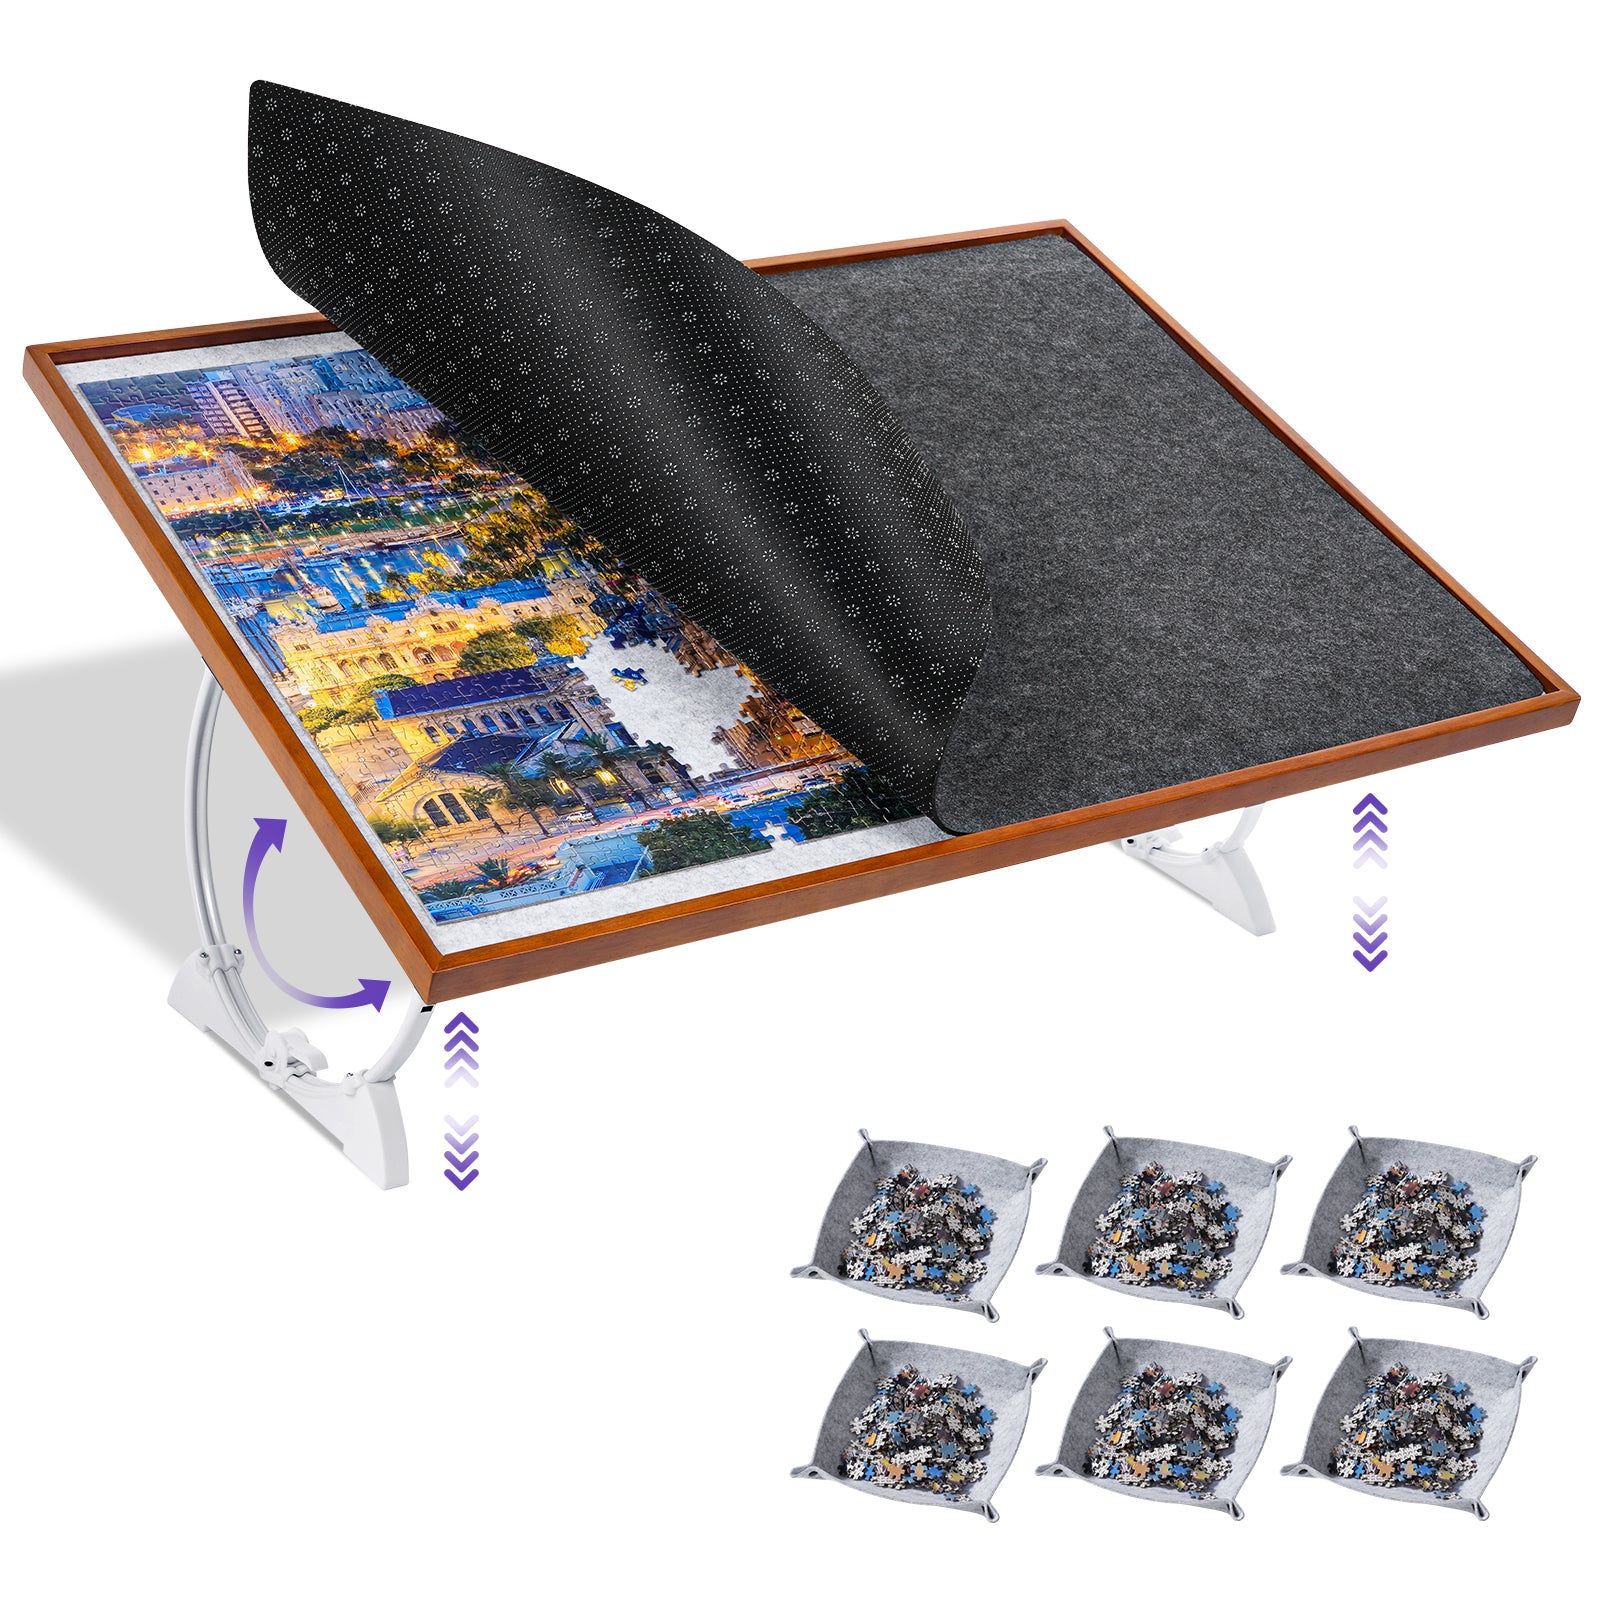 Jigsaw Puzzle Table with Adjustable Bracket for Up to 1500 Pieces